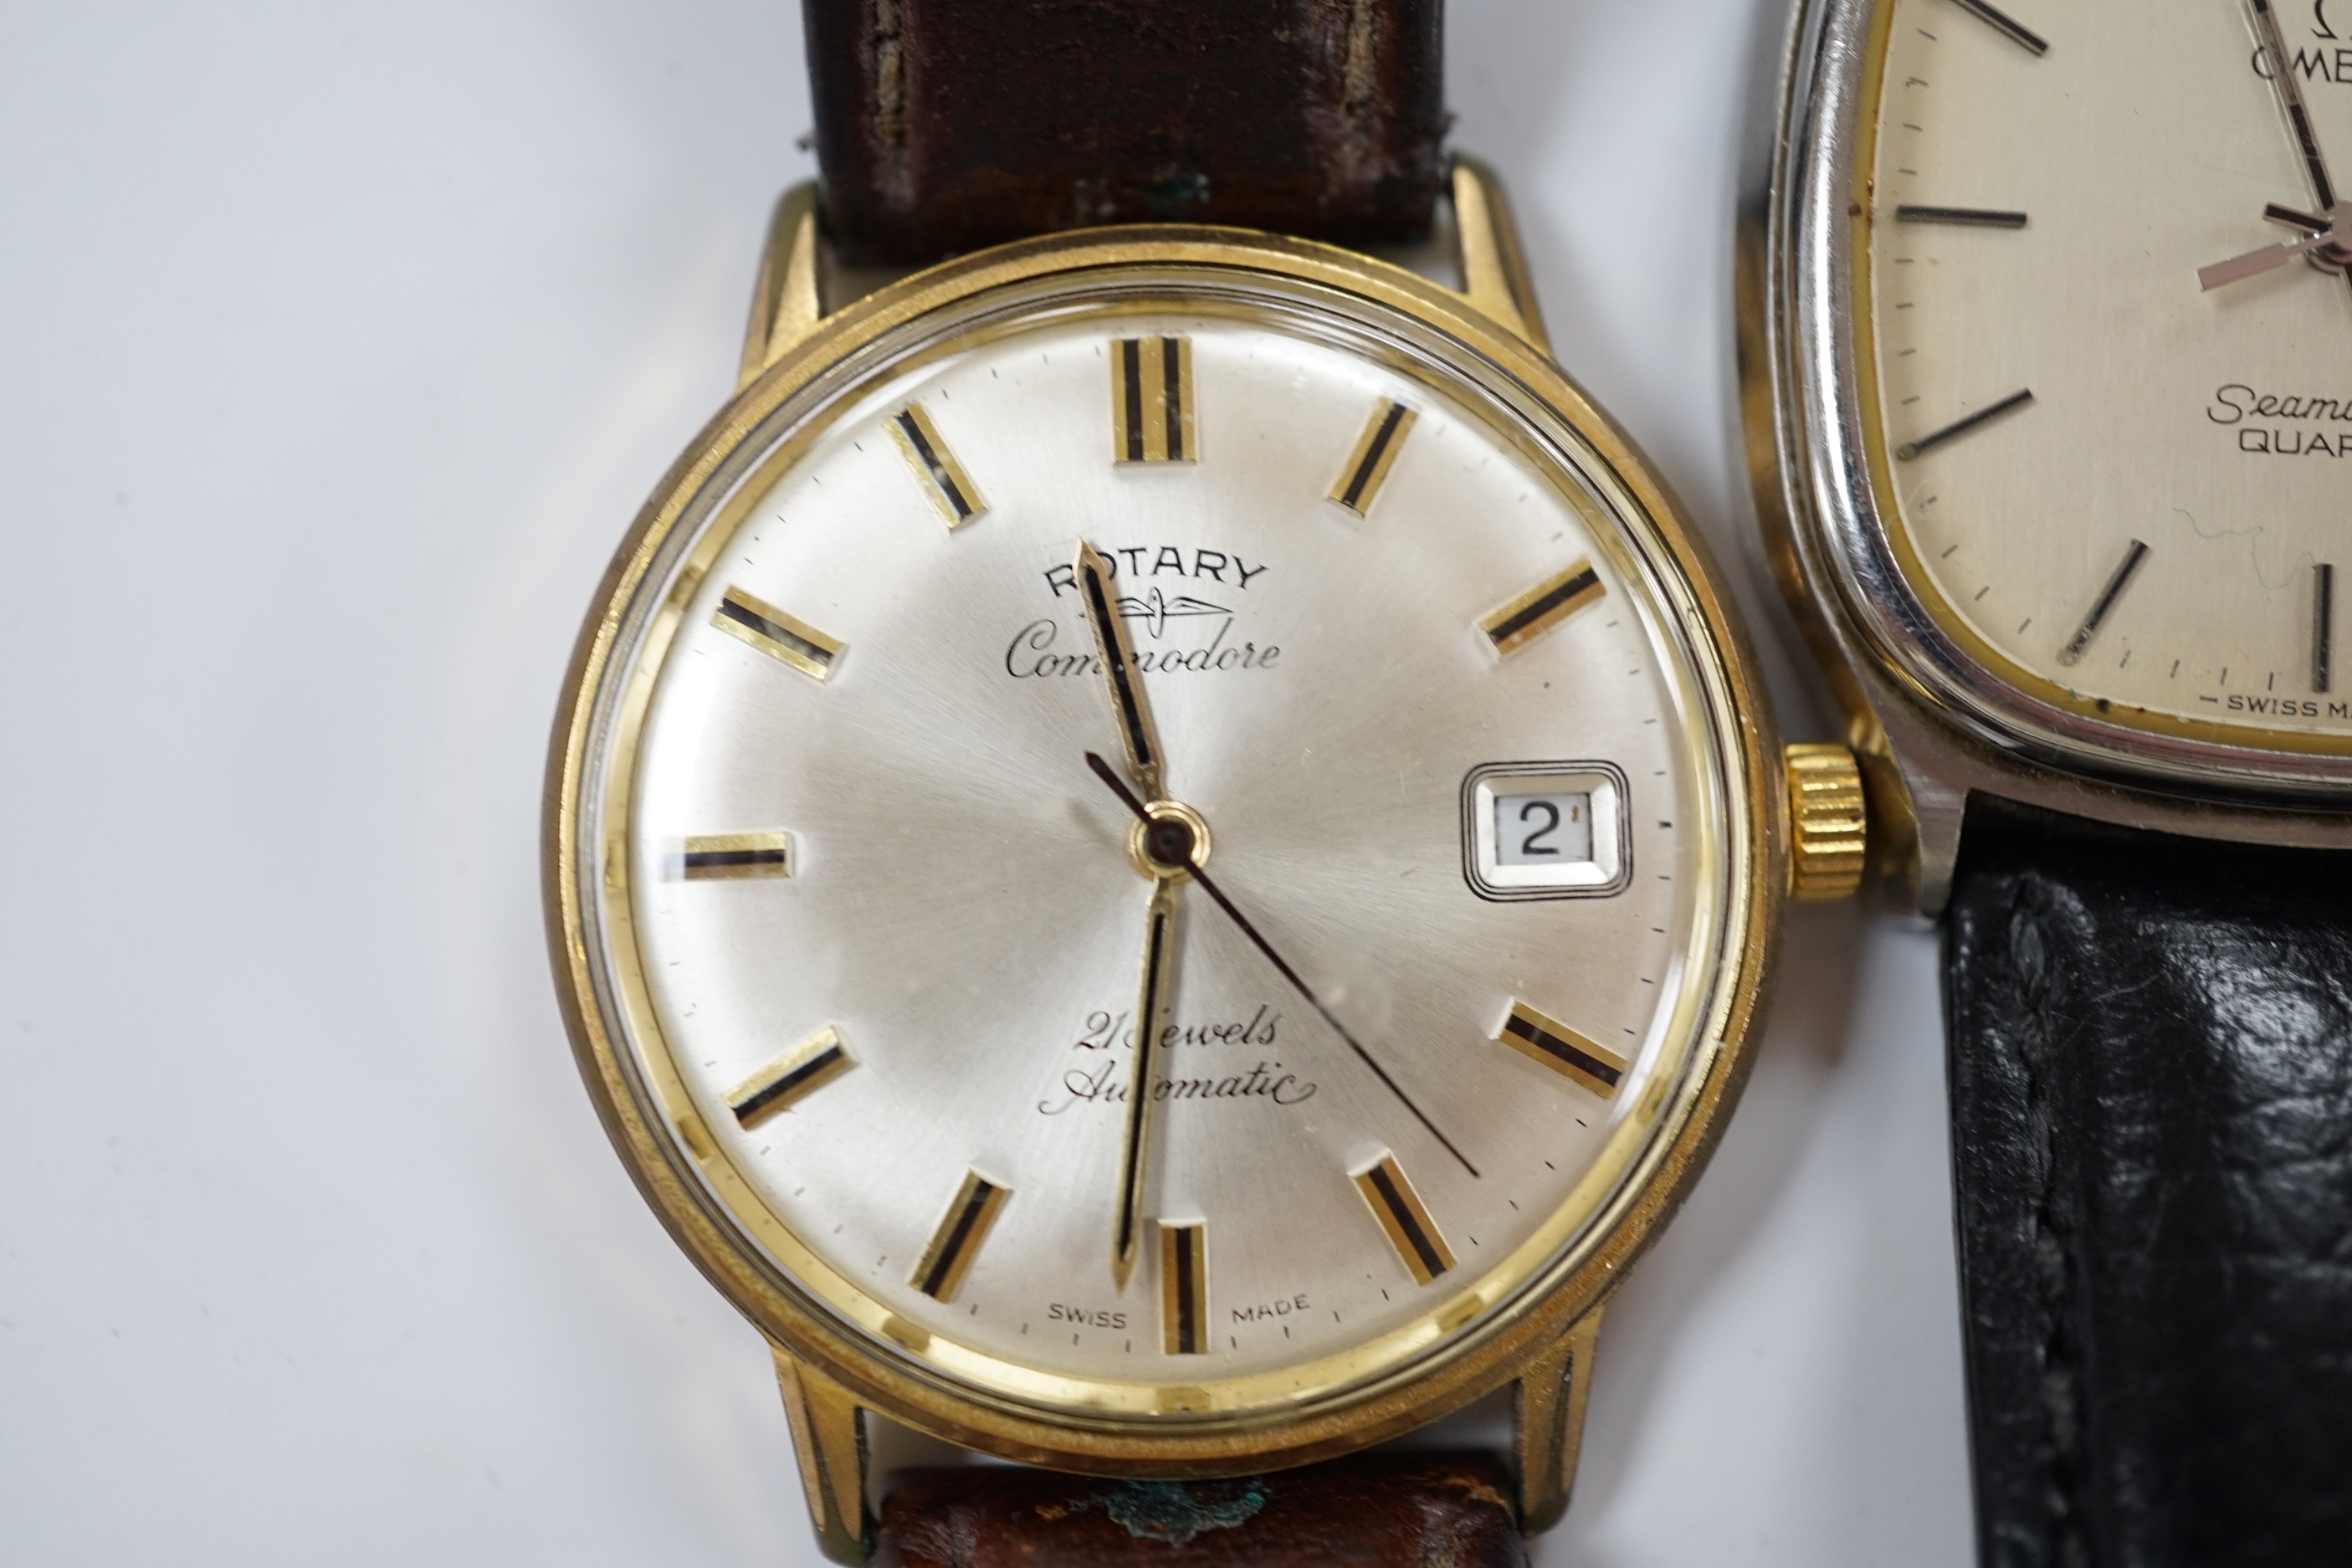 A gentleman's stainless steel Omega Seamaster quartz wrist watch, on associated leather strap, together with a gentleman's steel and gold plated Rotary Commodore automatic wrist watch and a French? wrist watch.